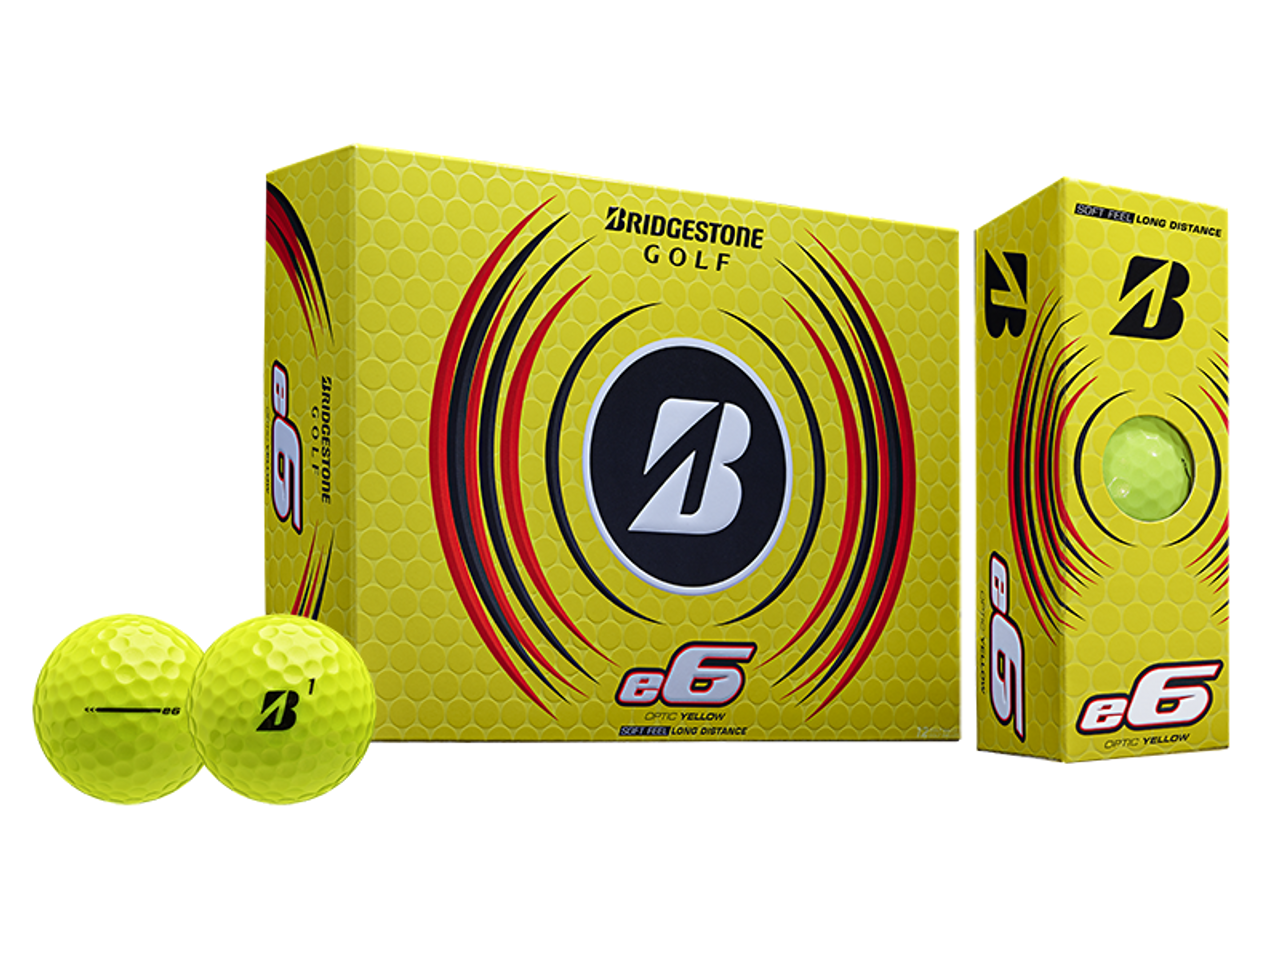 pros and cons of yellow golf balls